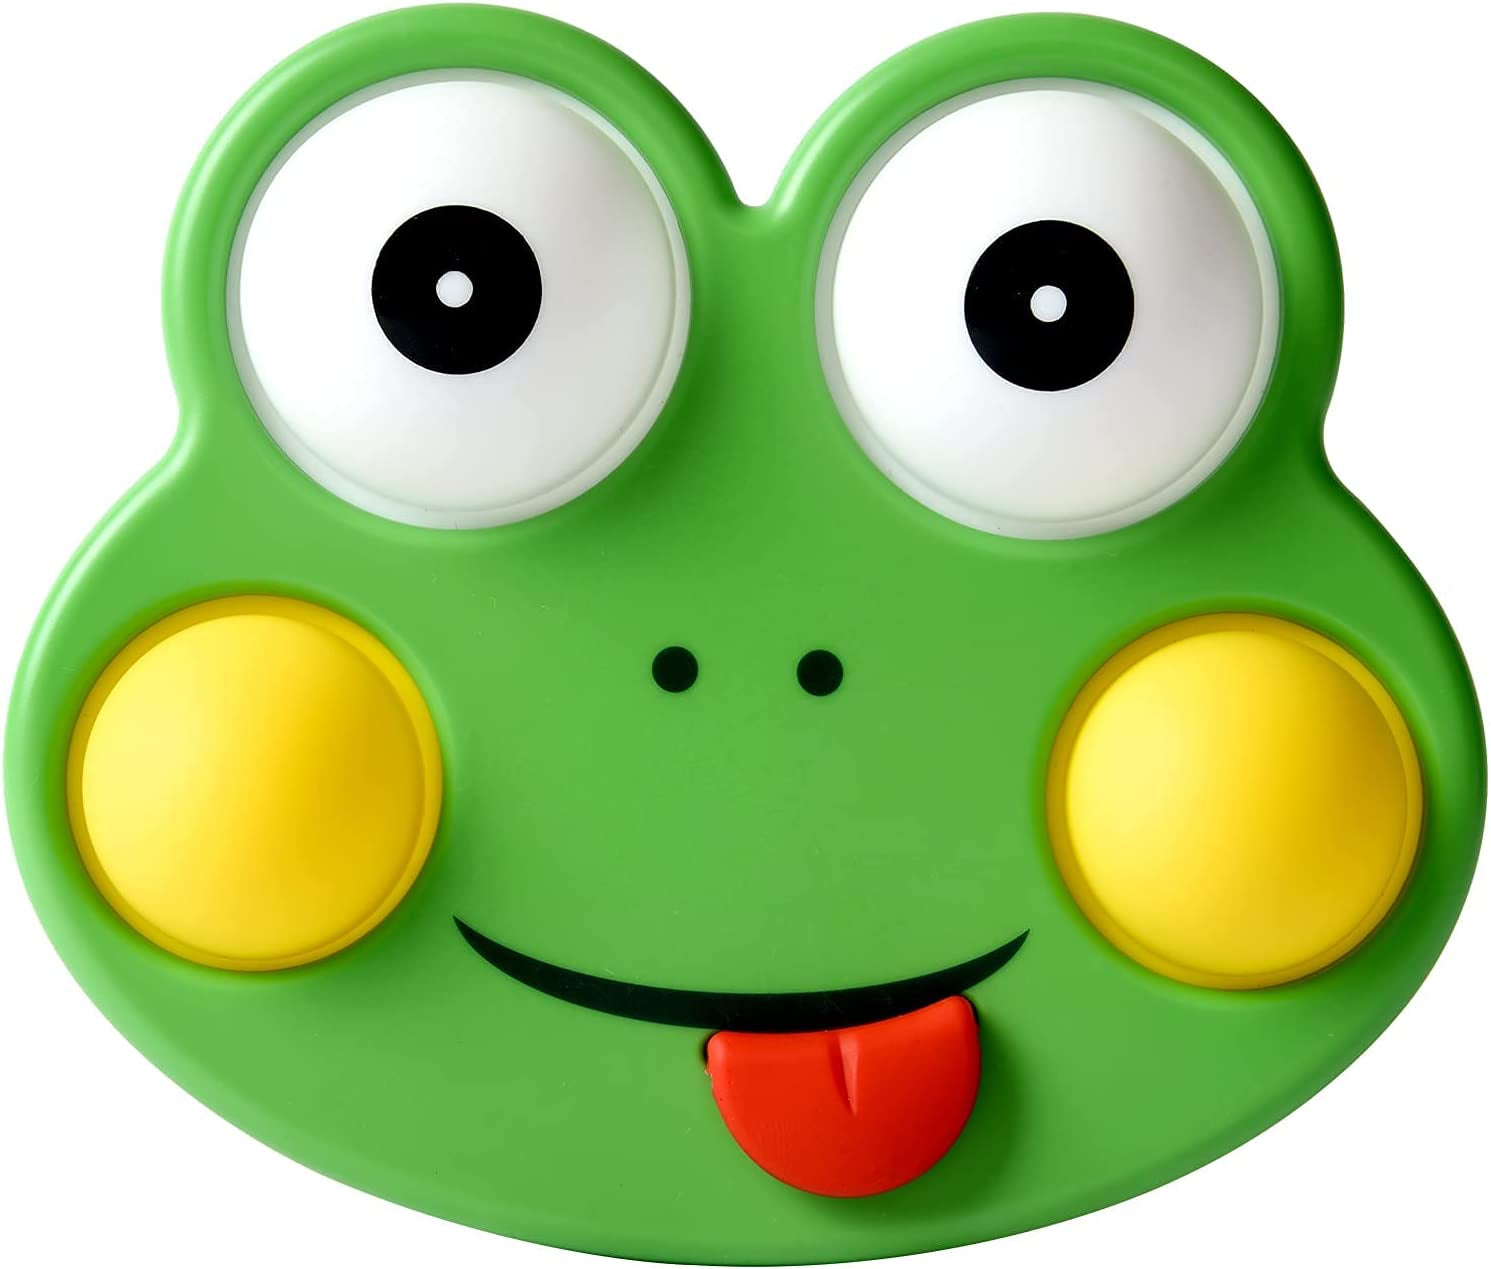 "Fun and Educational Frog Flipping Board - Perfect Stress Relief and Sensory Toy for Babies and Toddlers!"